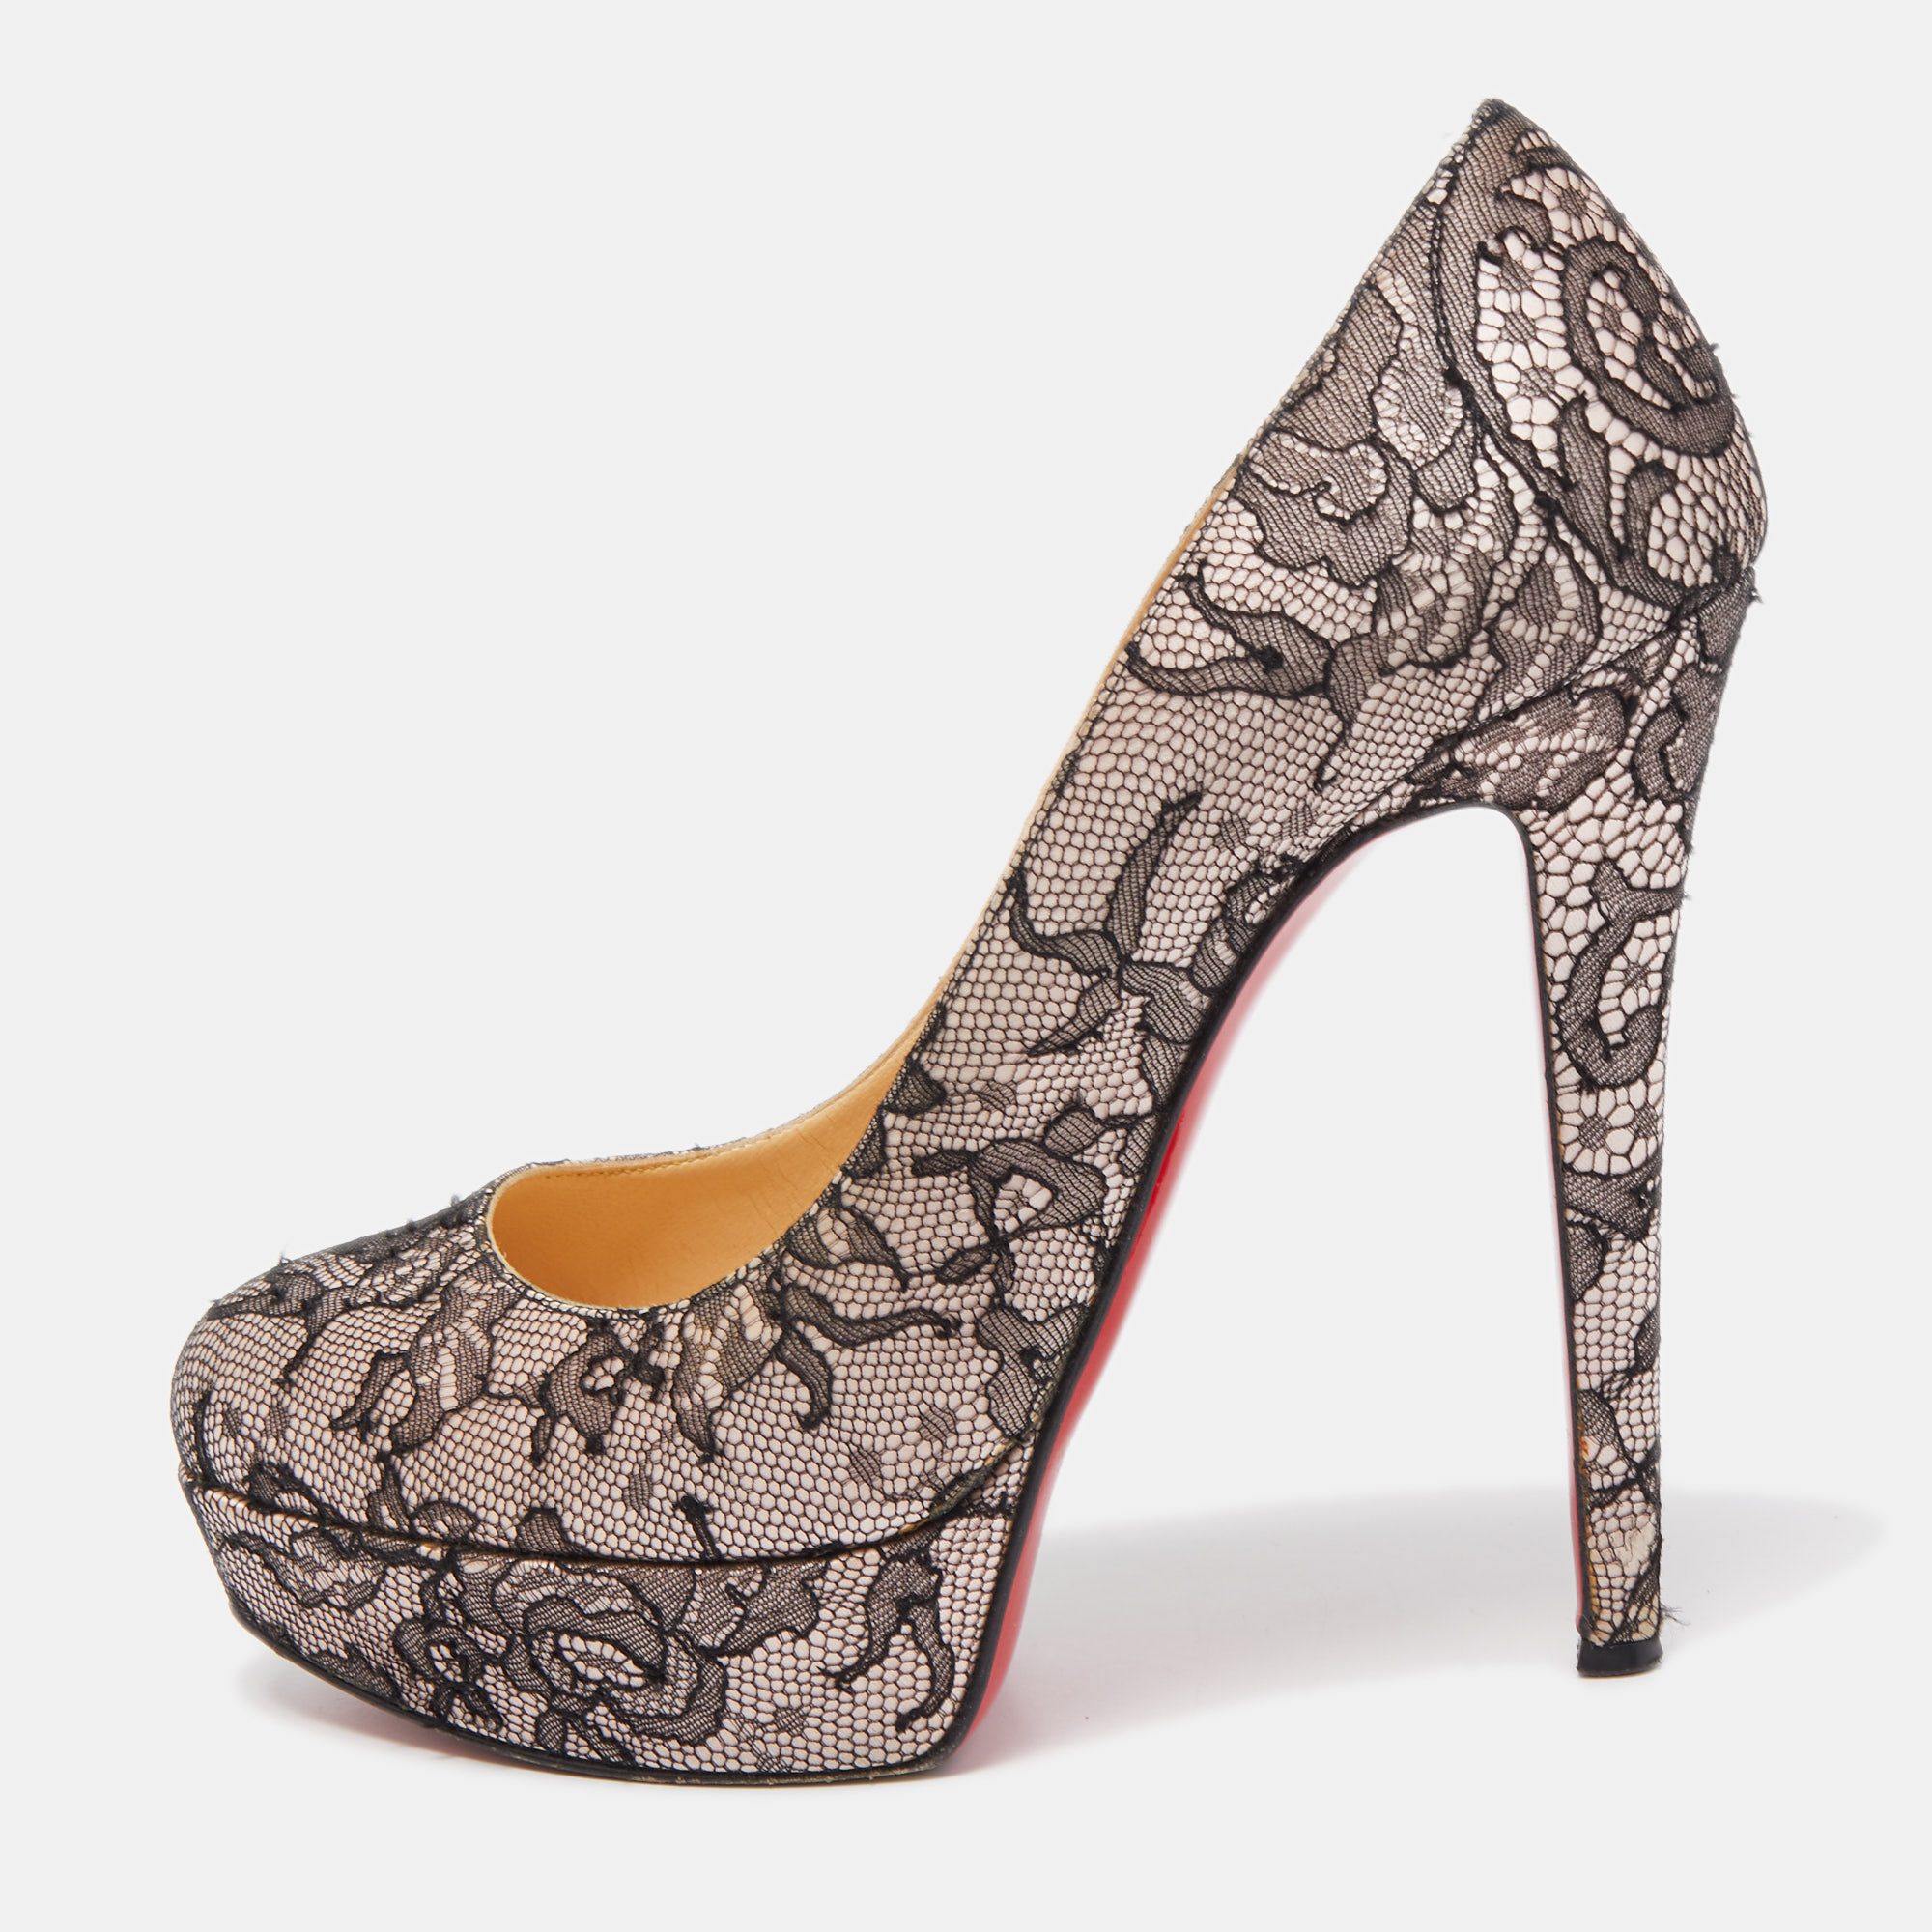 Every flawless design of Christian Louboutin like this pair of Bianca pumps is the epitome of feminine style. Crafted from lace and satin its upper is balanced on 13cm heels and platforms. The signature red lacquered sole of these shoes marks the brands expertise in stiletto making.